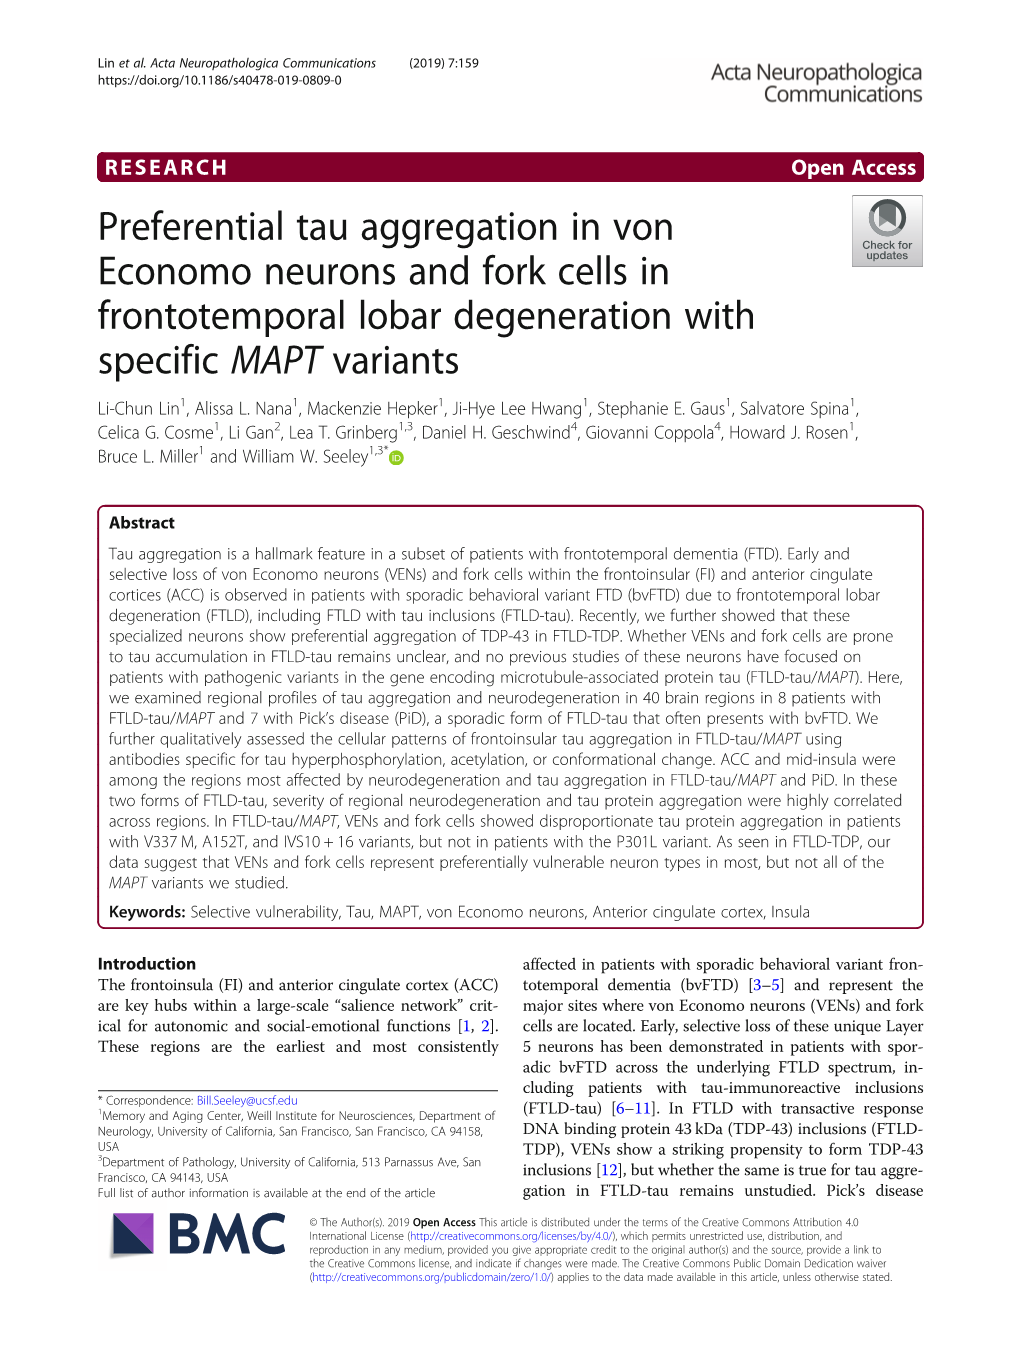 Preferential Tau Aggregation in Von Economo Neurons and Fork Cells in Frontotemporal Lobar Degeneration with Specific MAPT Variants Li-Chun Lin1, Alissa L